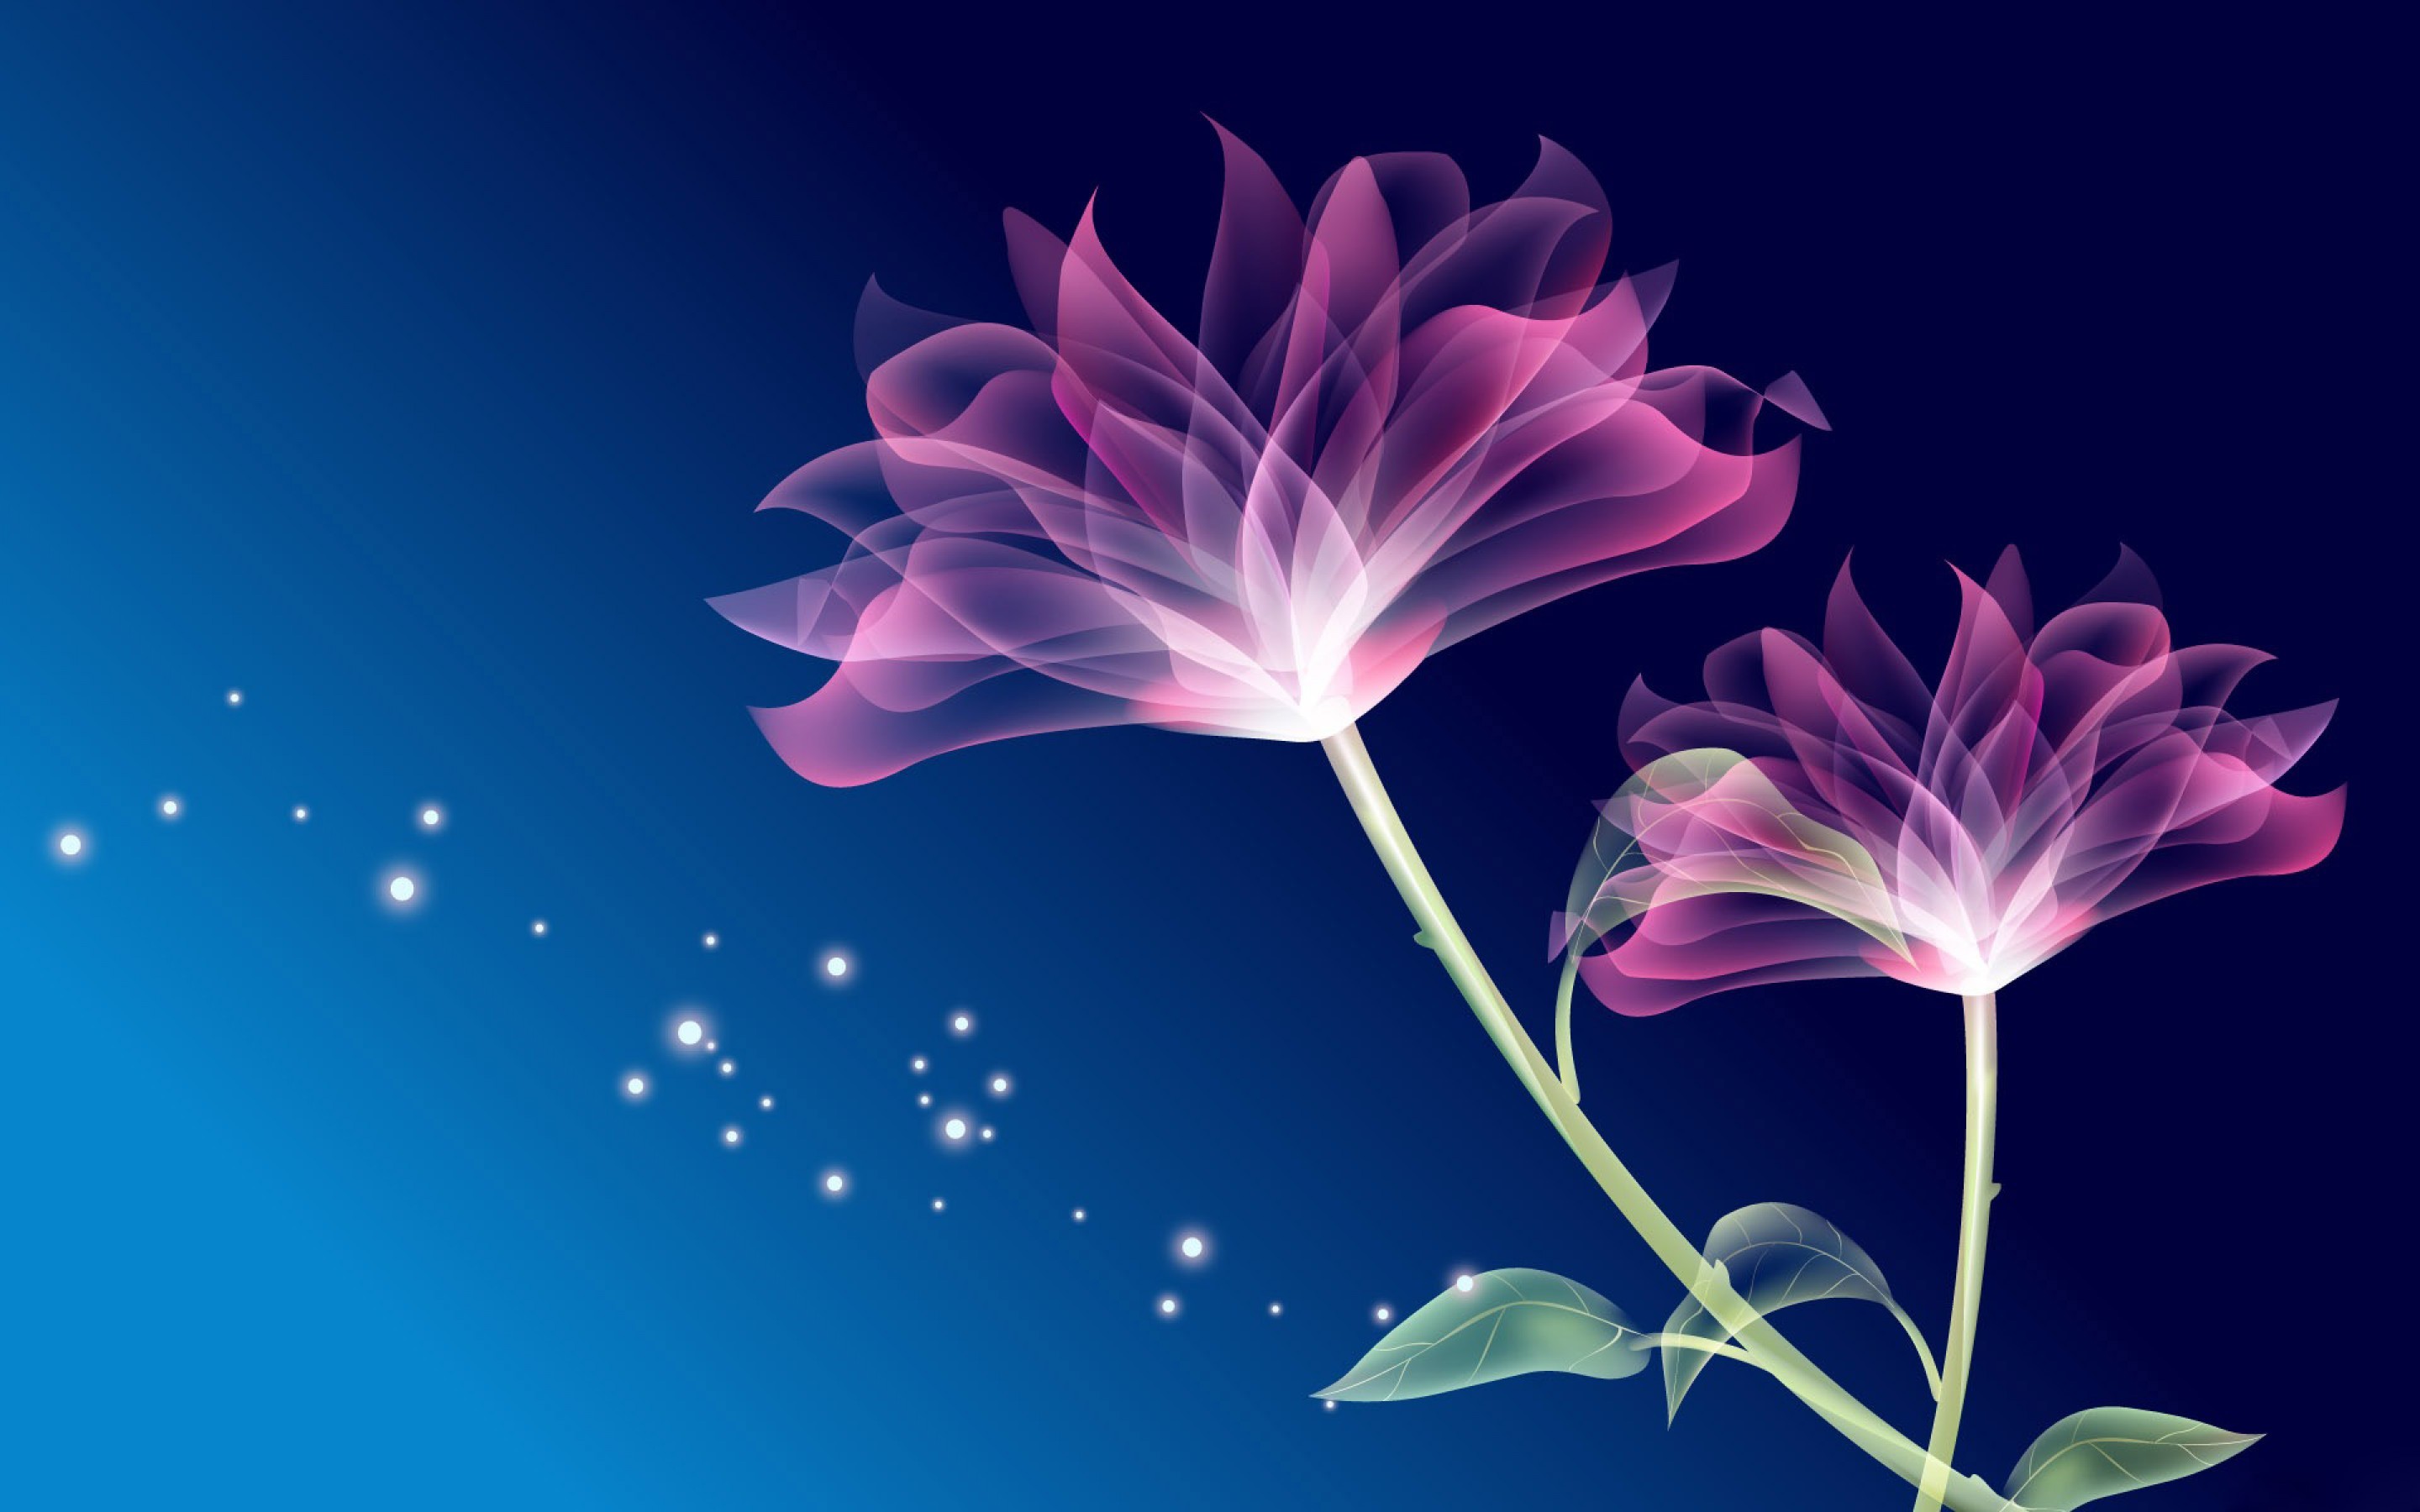 Animated Flower Wallpaper For Mobile Image Gallery Hcpr